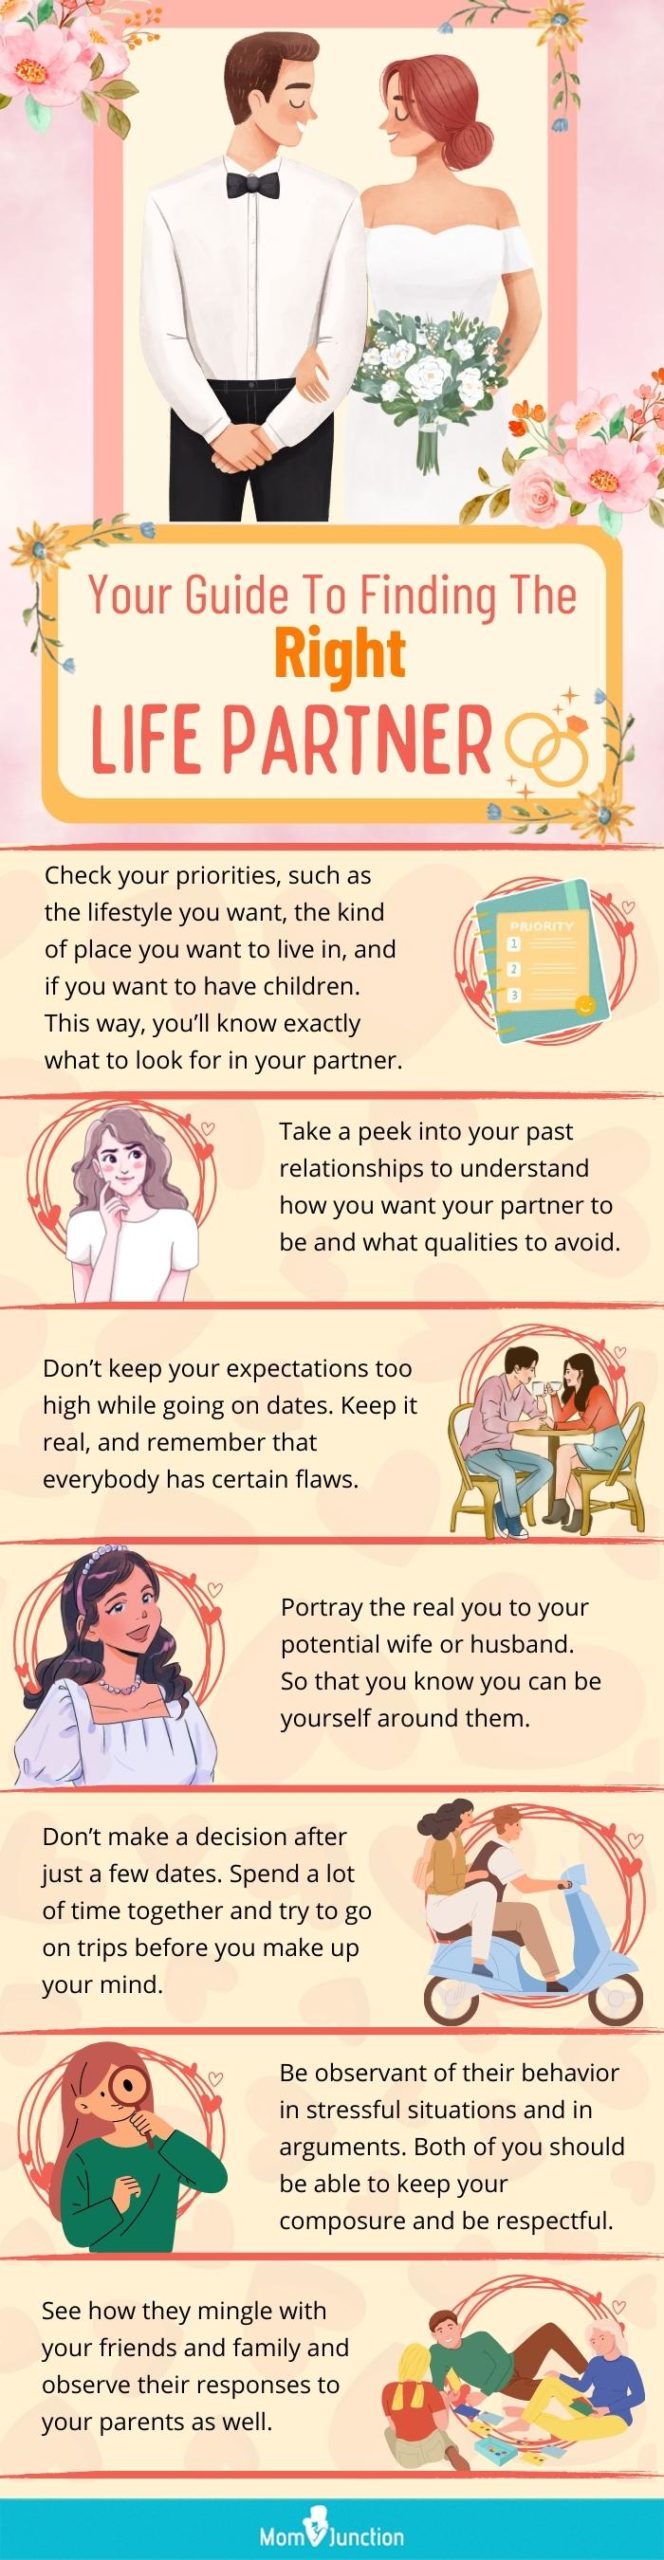 your guide to finding the right life partner (infographic)